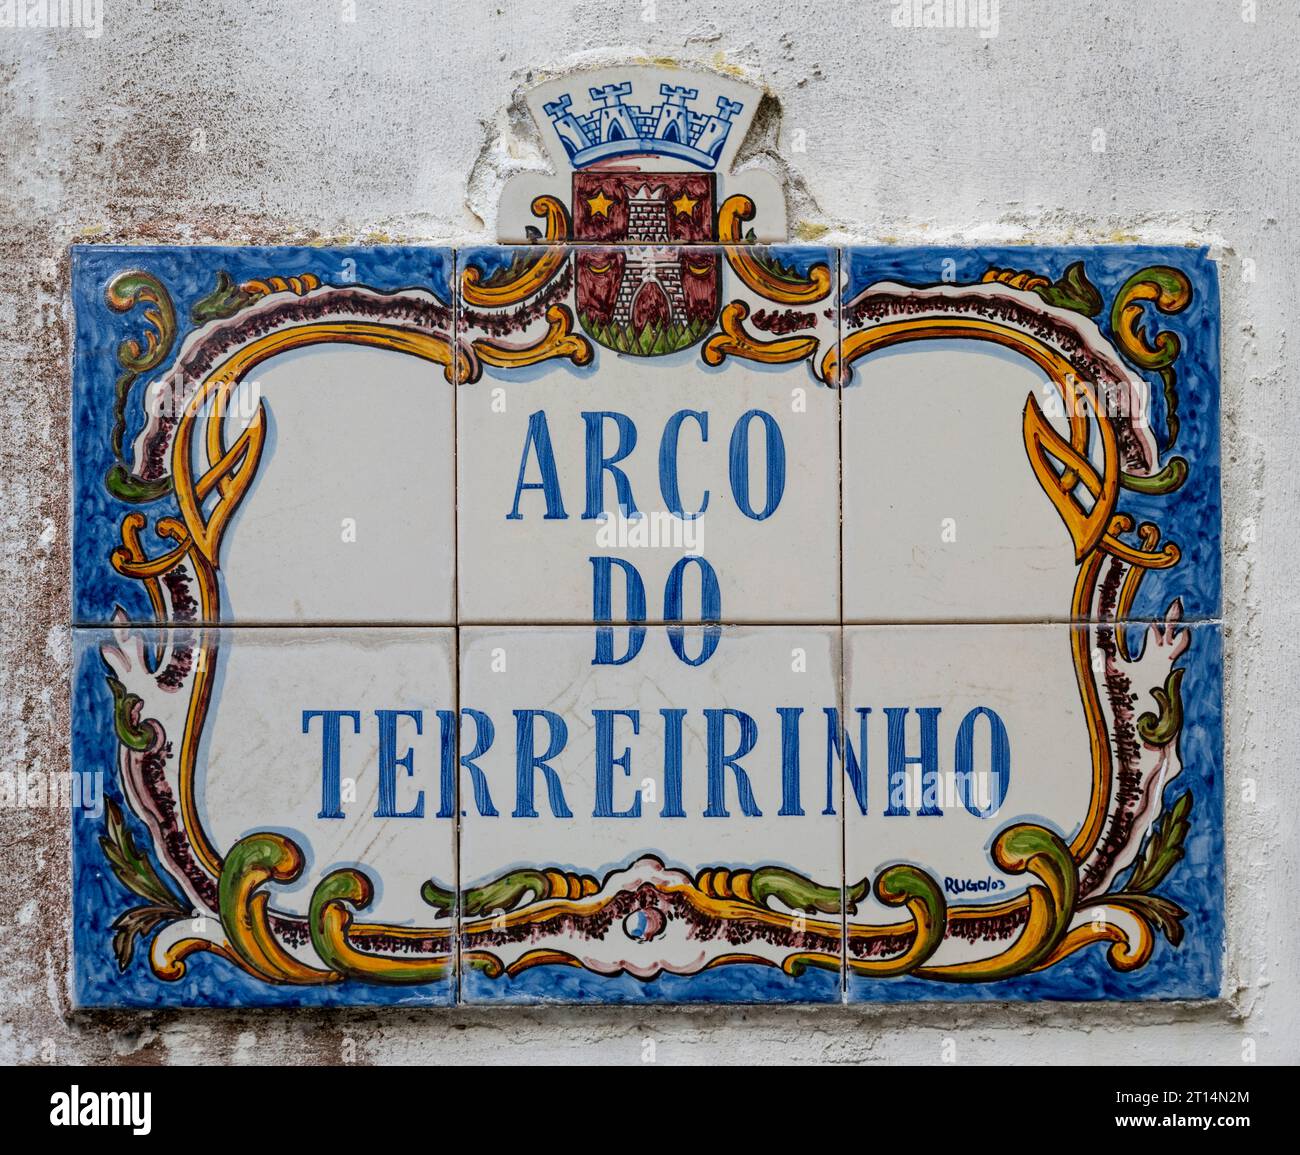 Arco Do Terreirinho decorated and painted tiled street sign Sintra is a town and municipality in the Greater Lisbon region of Portugal, A major touris Stock Photo